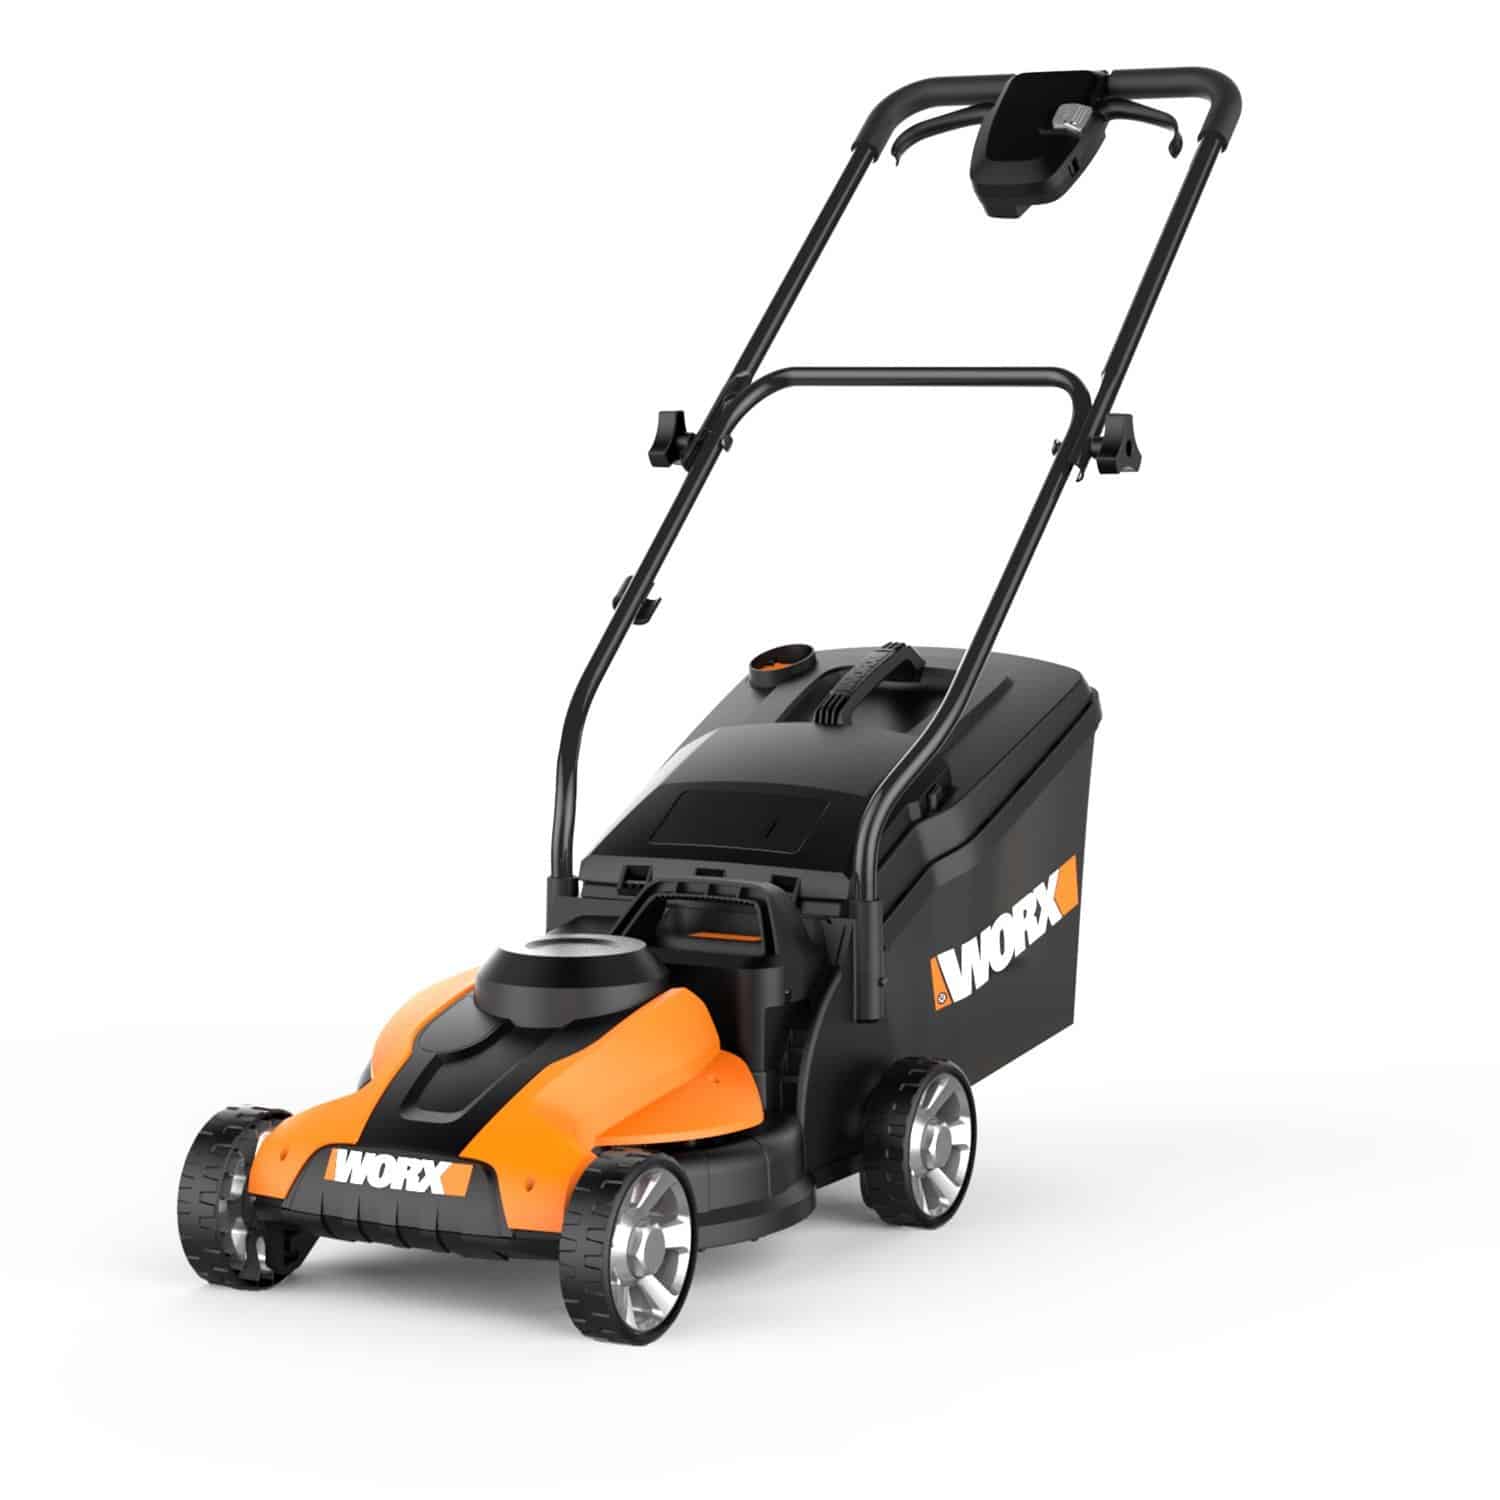 Worx 24V WG775 Powertank Review: Great for Small Yards